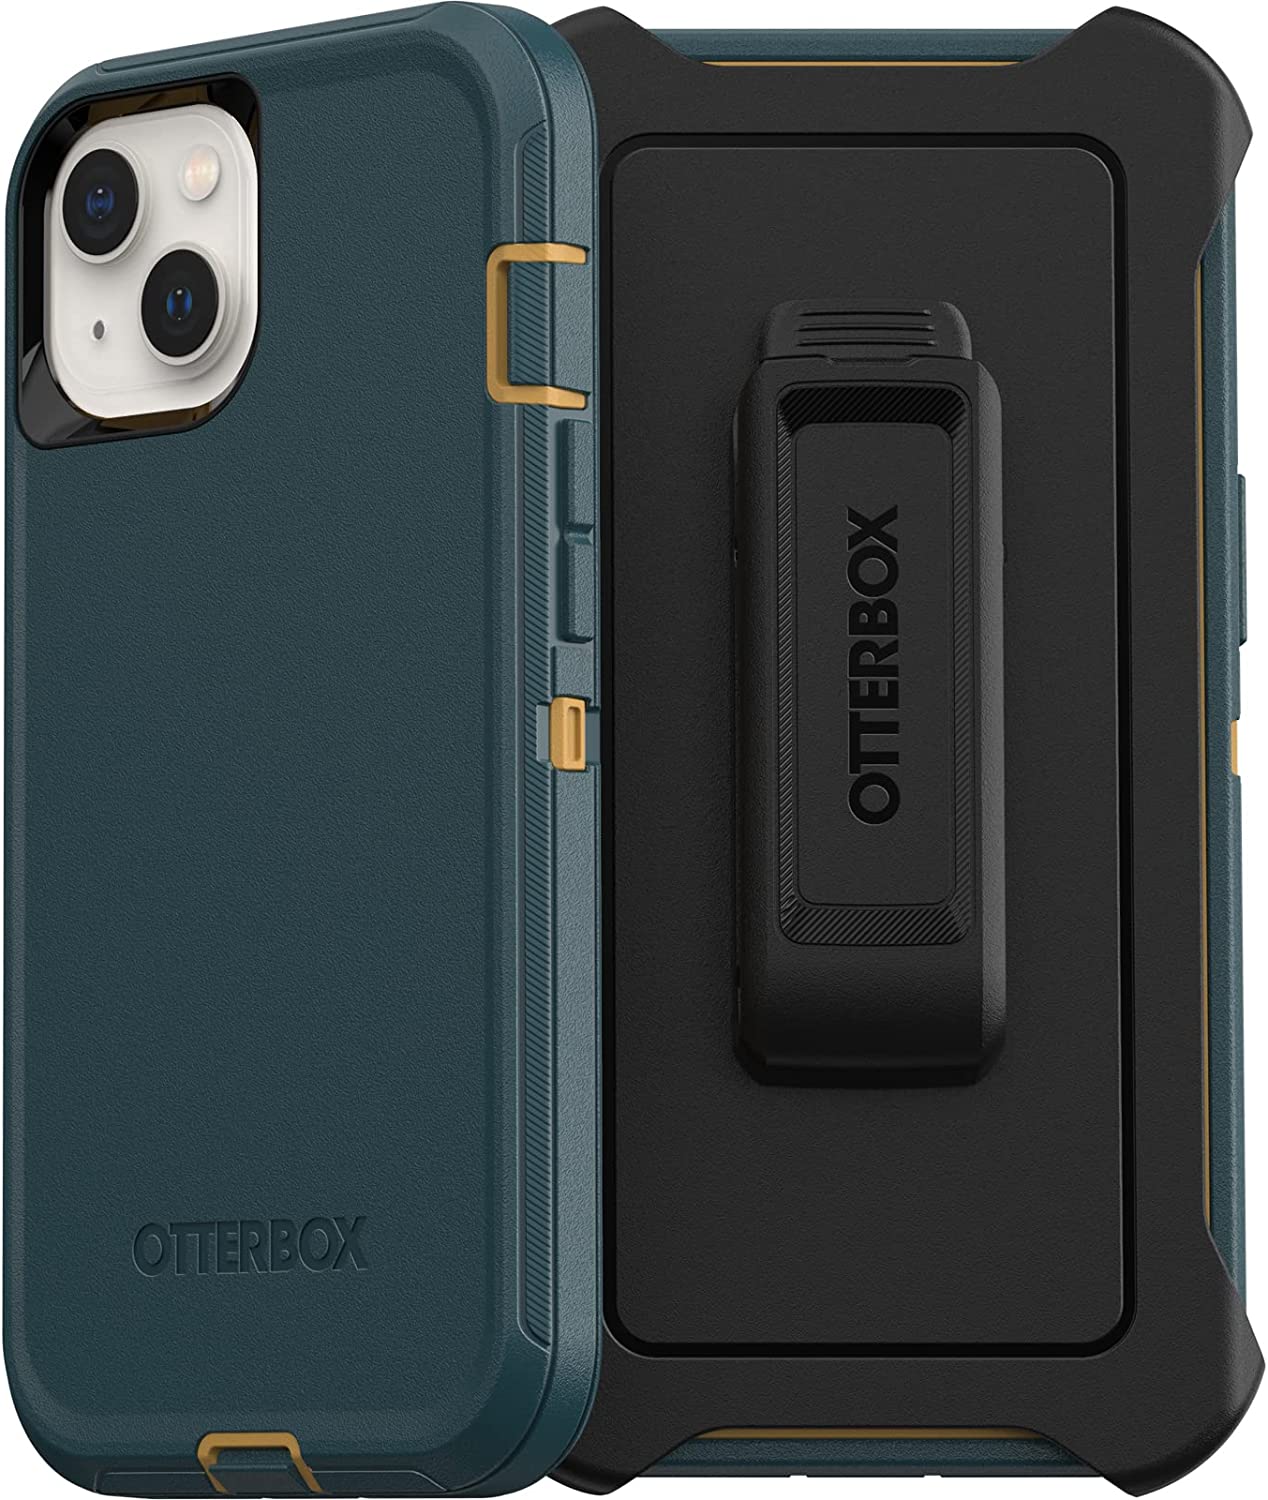 OtterBox DEFENDER SERIES Case for Apple iPhone 13 - Hunter Green (Certified Refurbished)